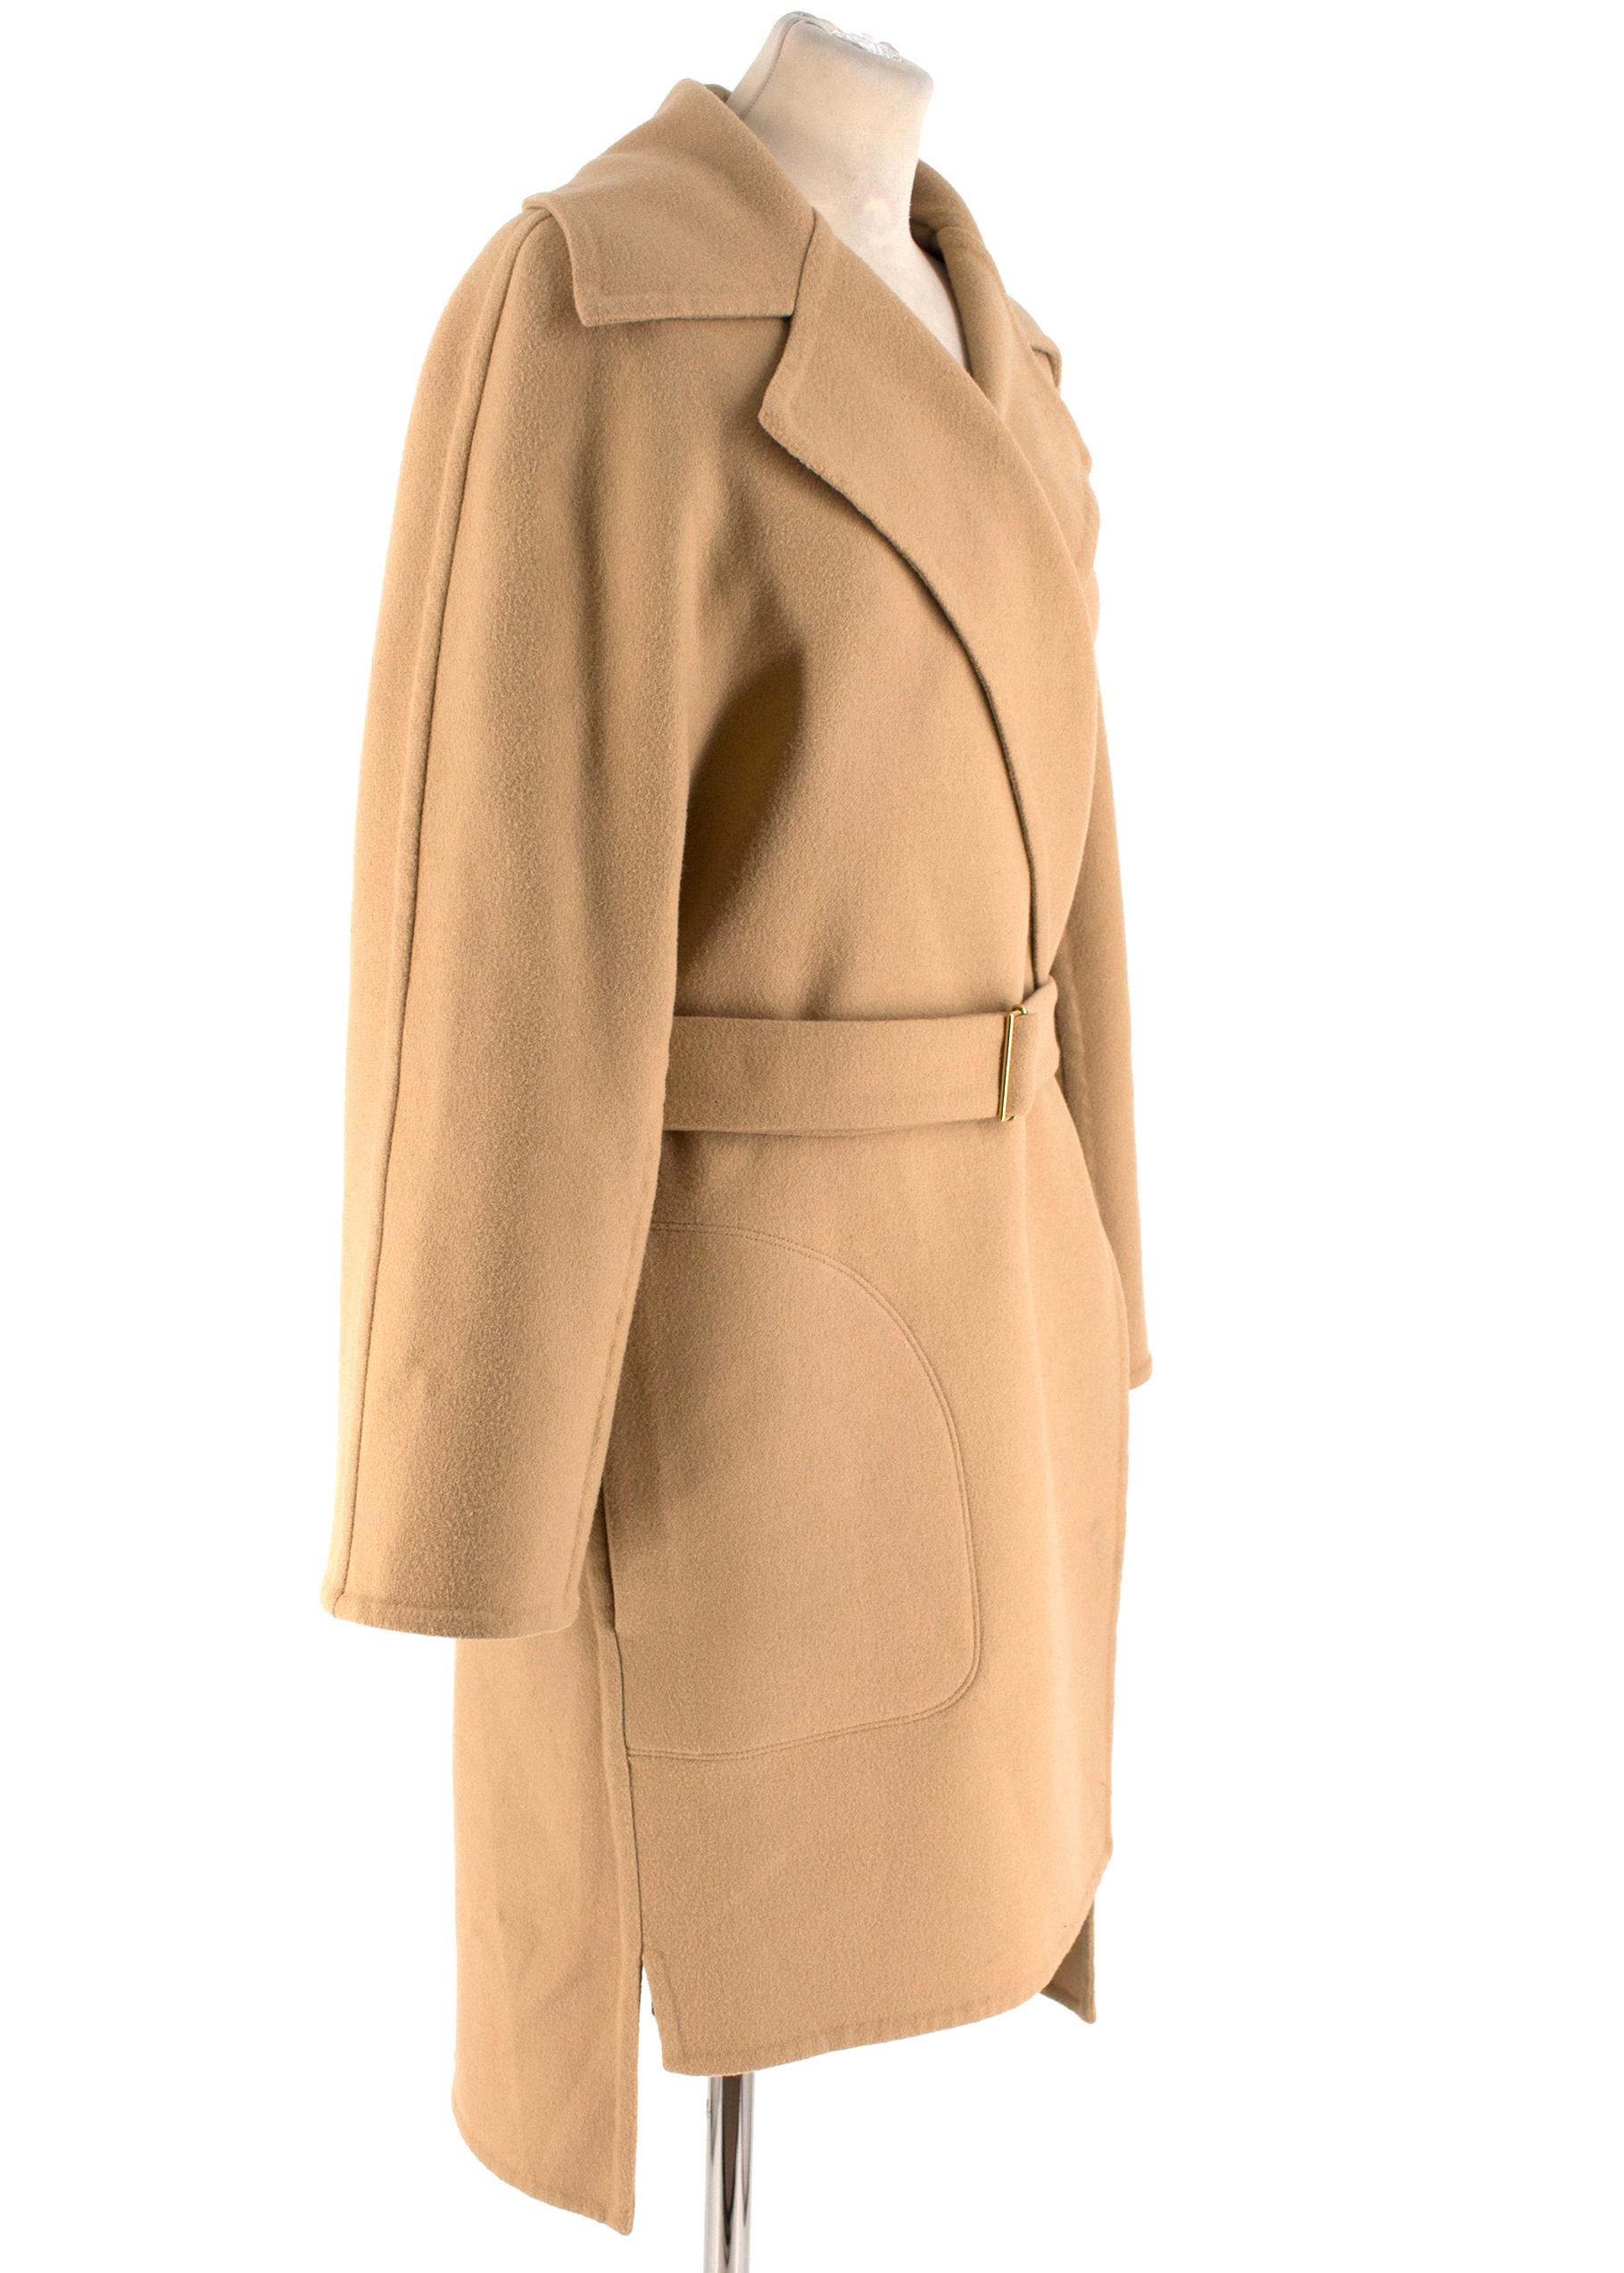 Chloe Double-Faced Wool Camel Coat

-Camel coat with belt
-Gold toned closure
-Two front pockets
-Large lapels
-Slit at the back
-Buckle embossed with Chloe

Please note, these items are pre-owned and may show signs of being stored even when unworn